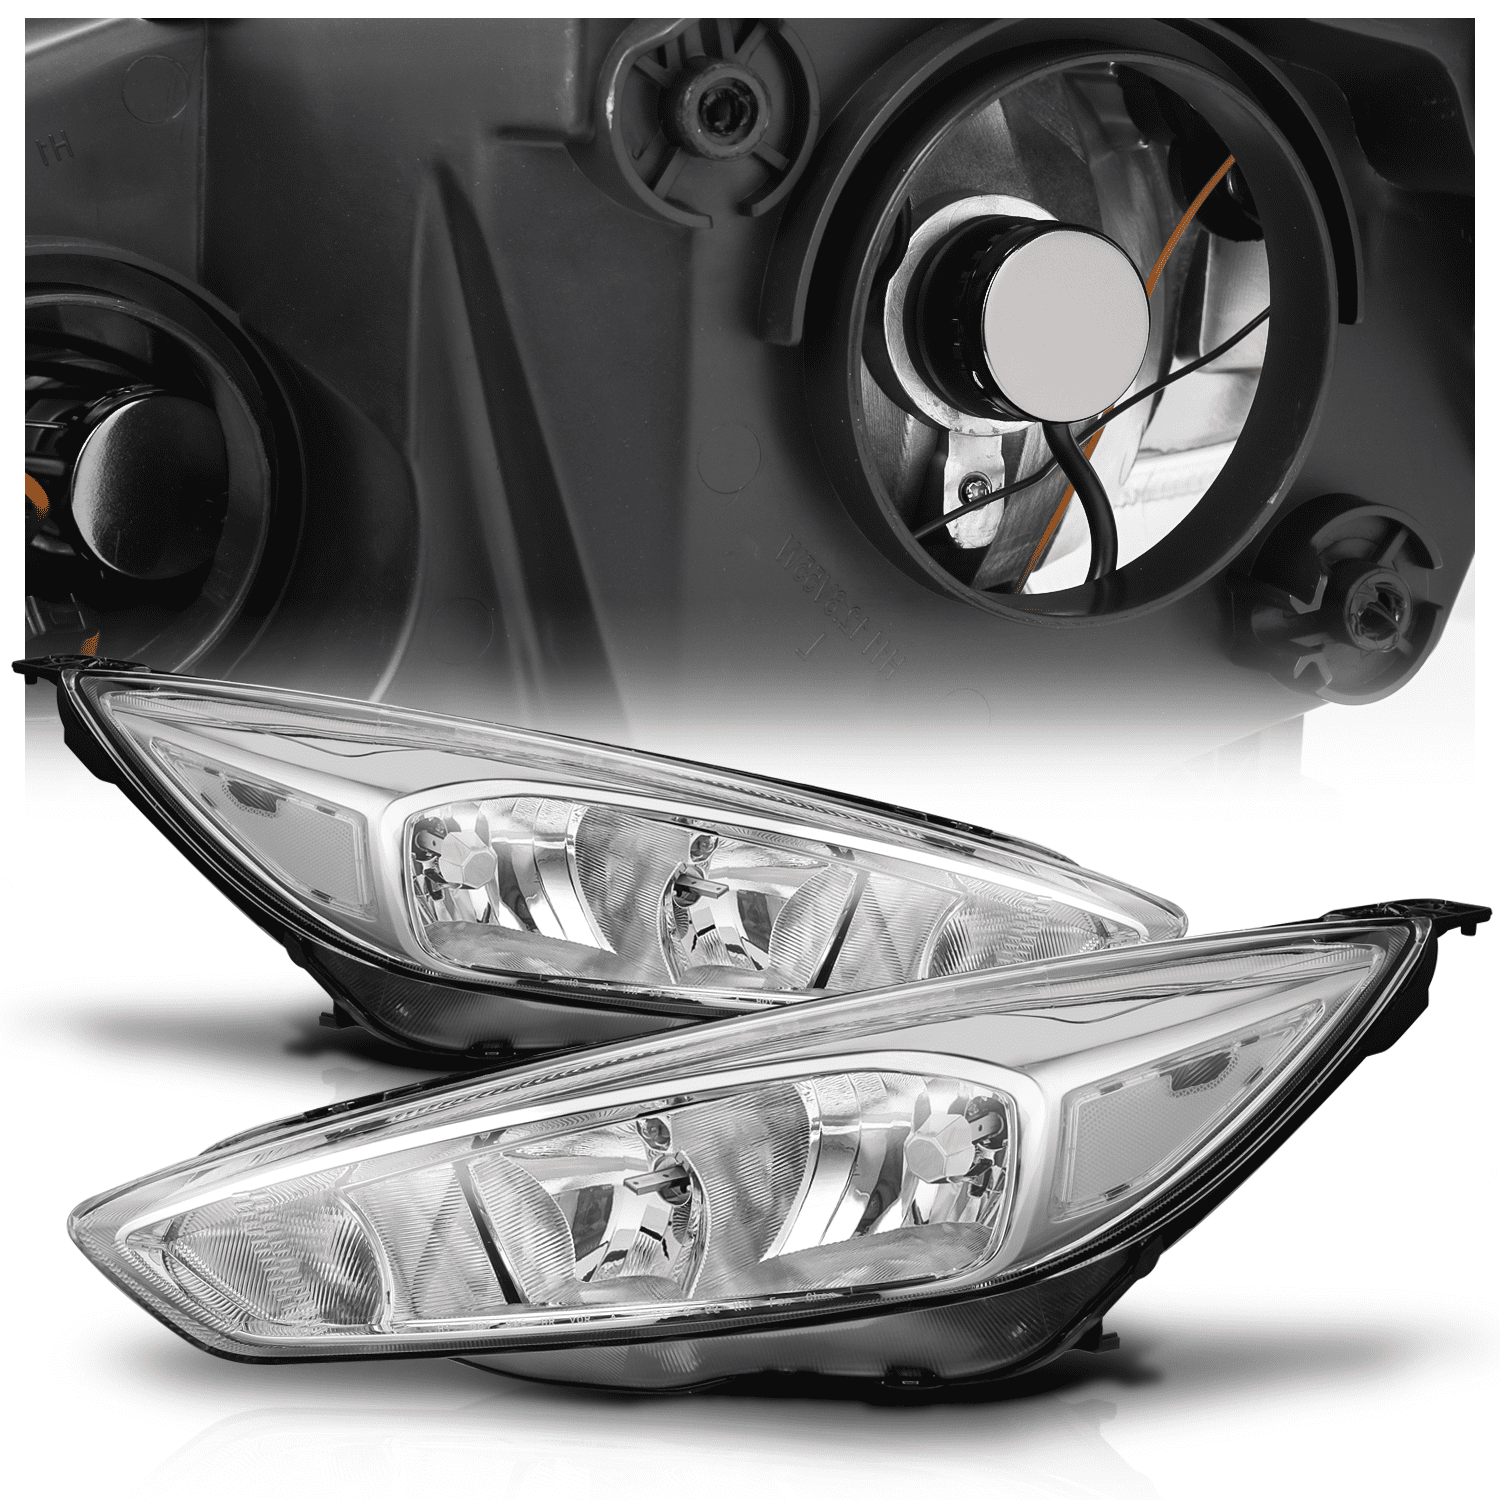 M-AUTO Headlight Assembly with 2 Pairs Pre-Assembled LED Bulbs for 15 16 17  18 Ford Focus, Chrome Housing Clear Lens Clear Corner